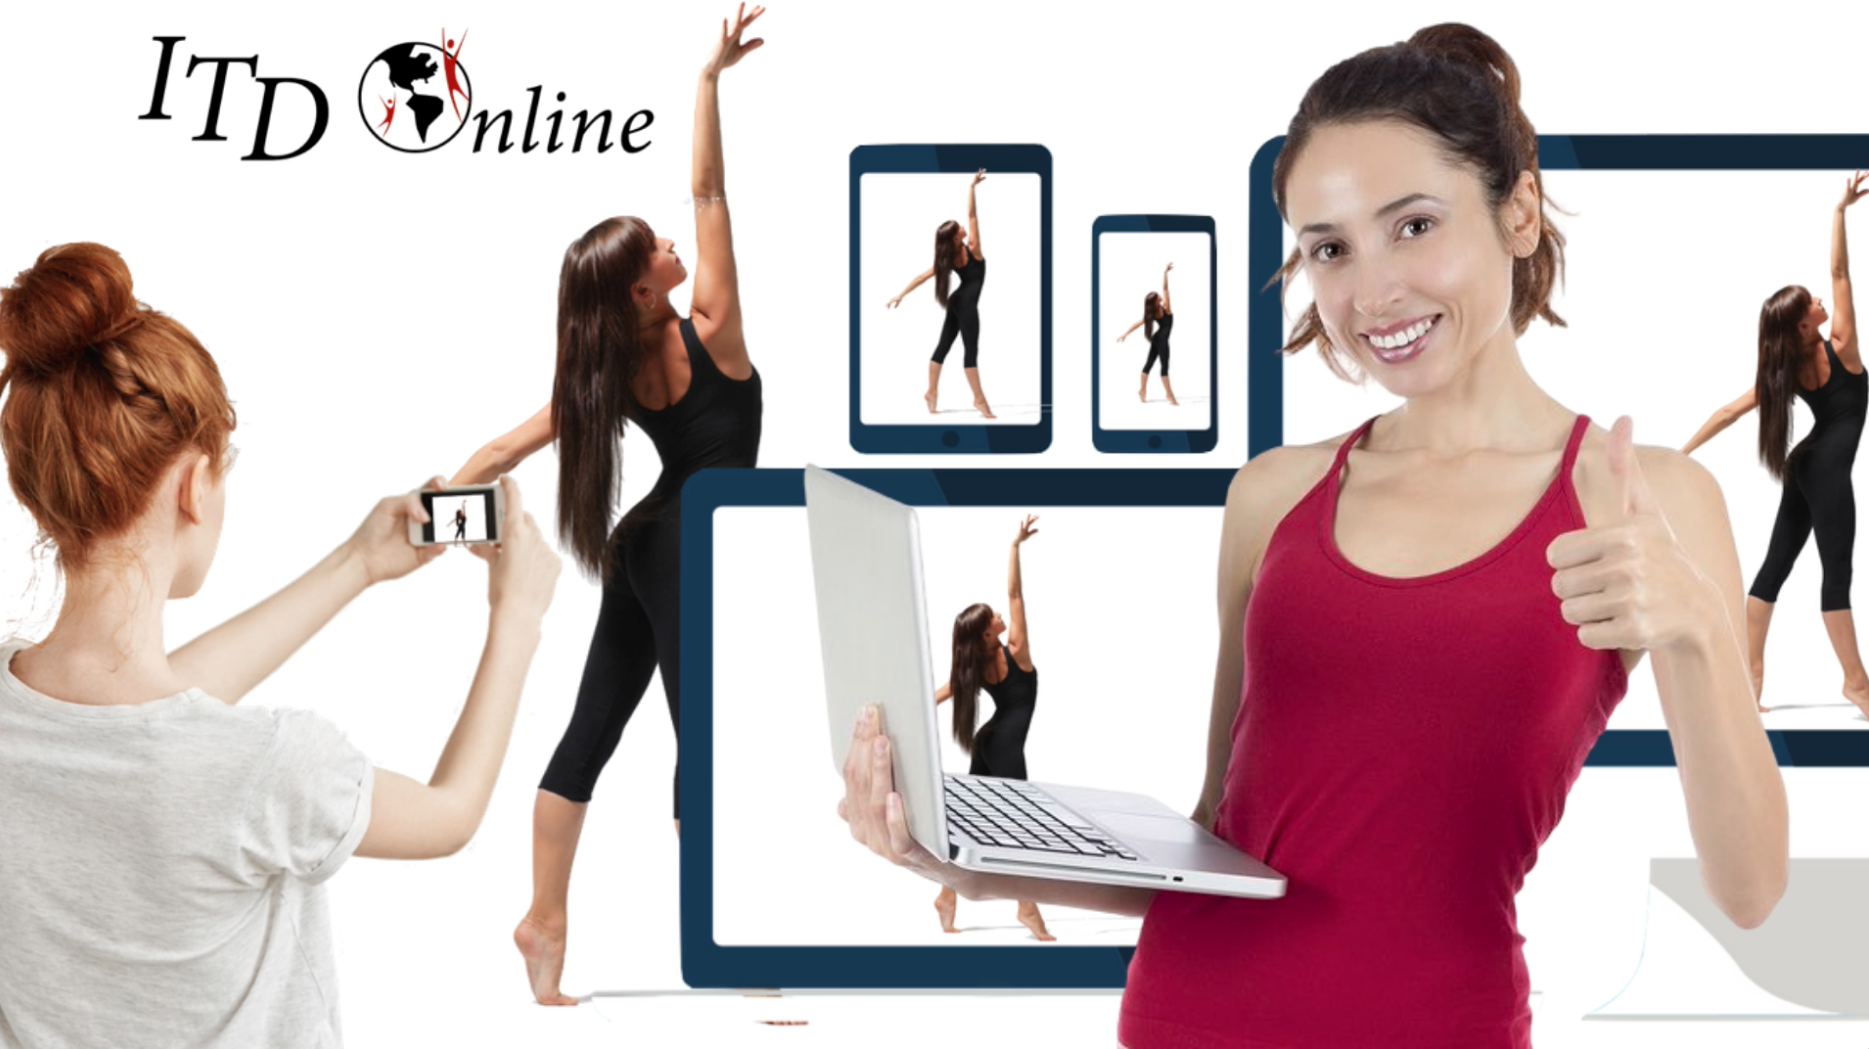 photo depicting dance classes on a computer,tablet, and smart phone.